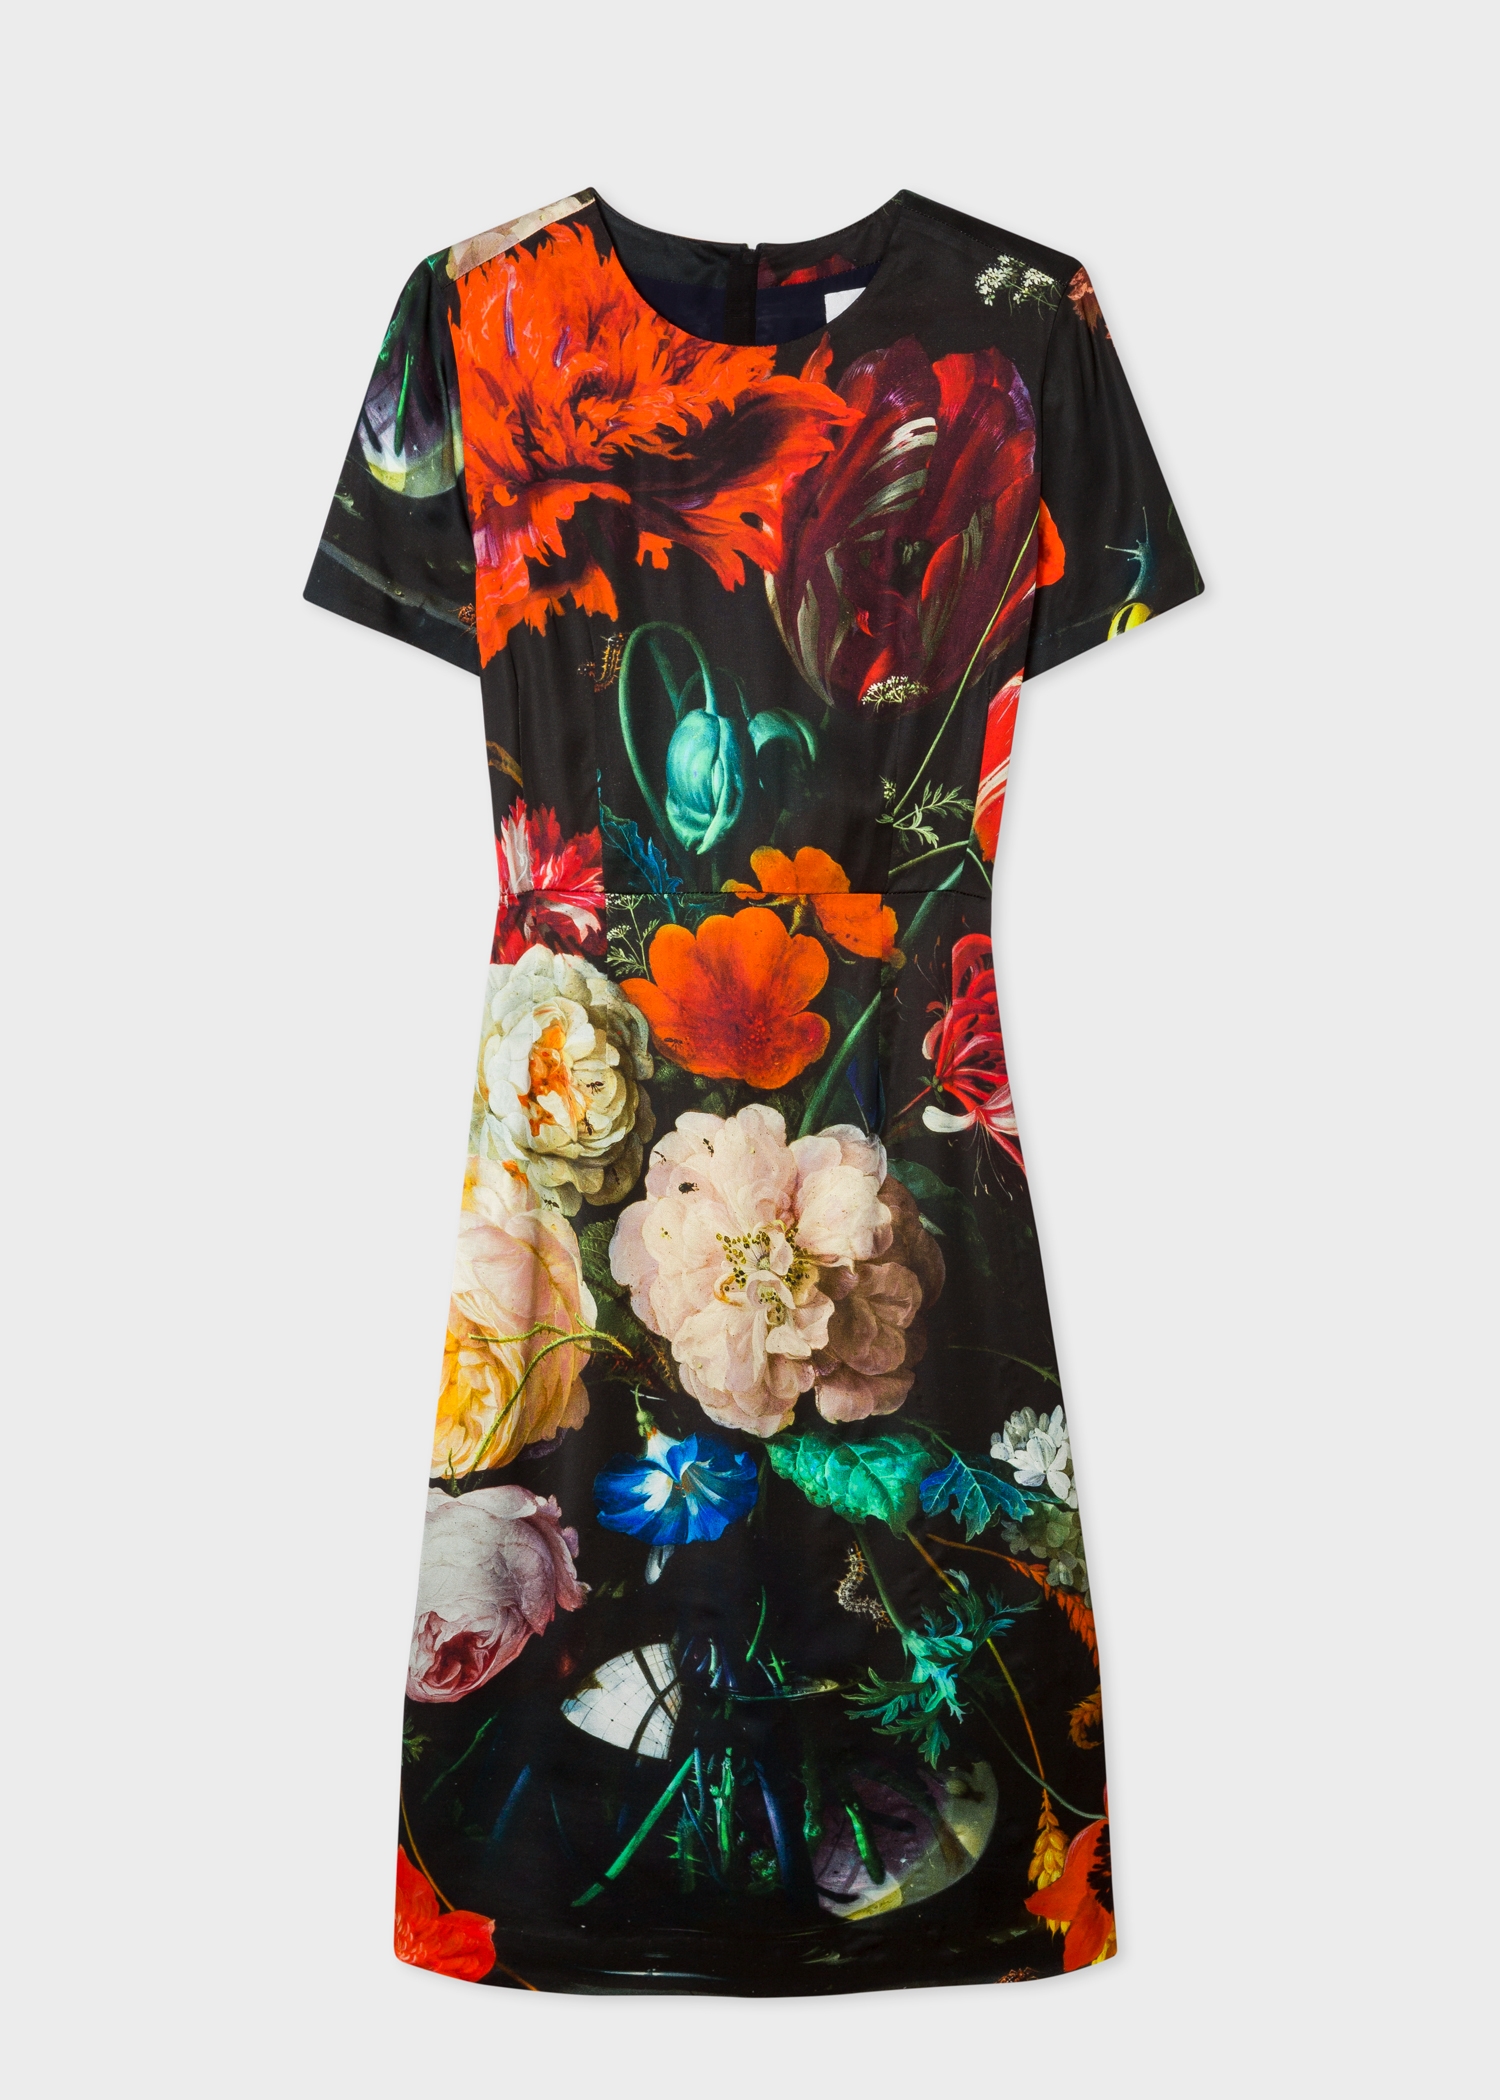 Front view - Women's 'New Masters' Print Short-Sleeve Dress Paul Smith